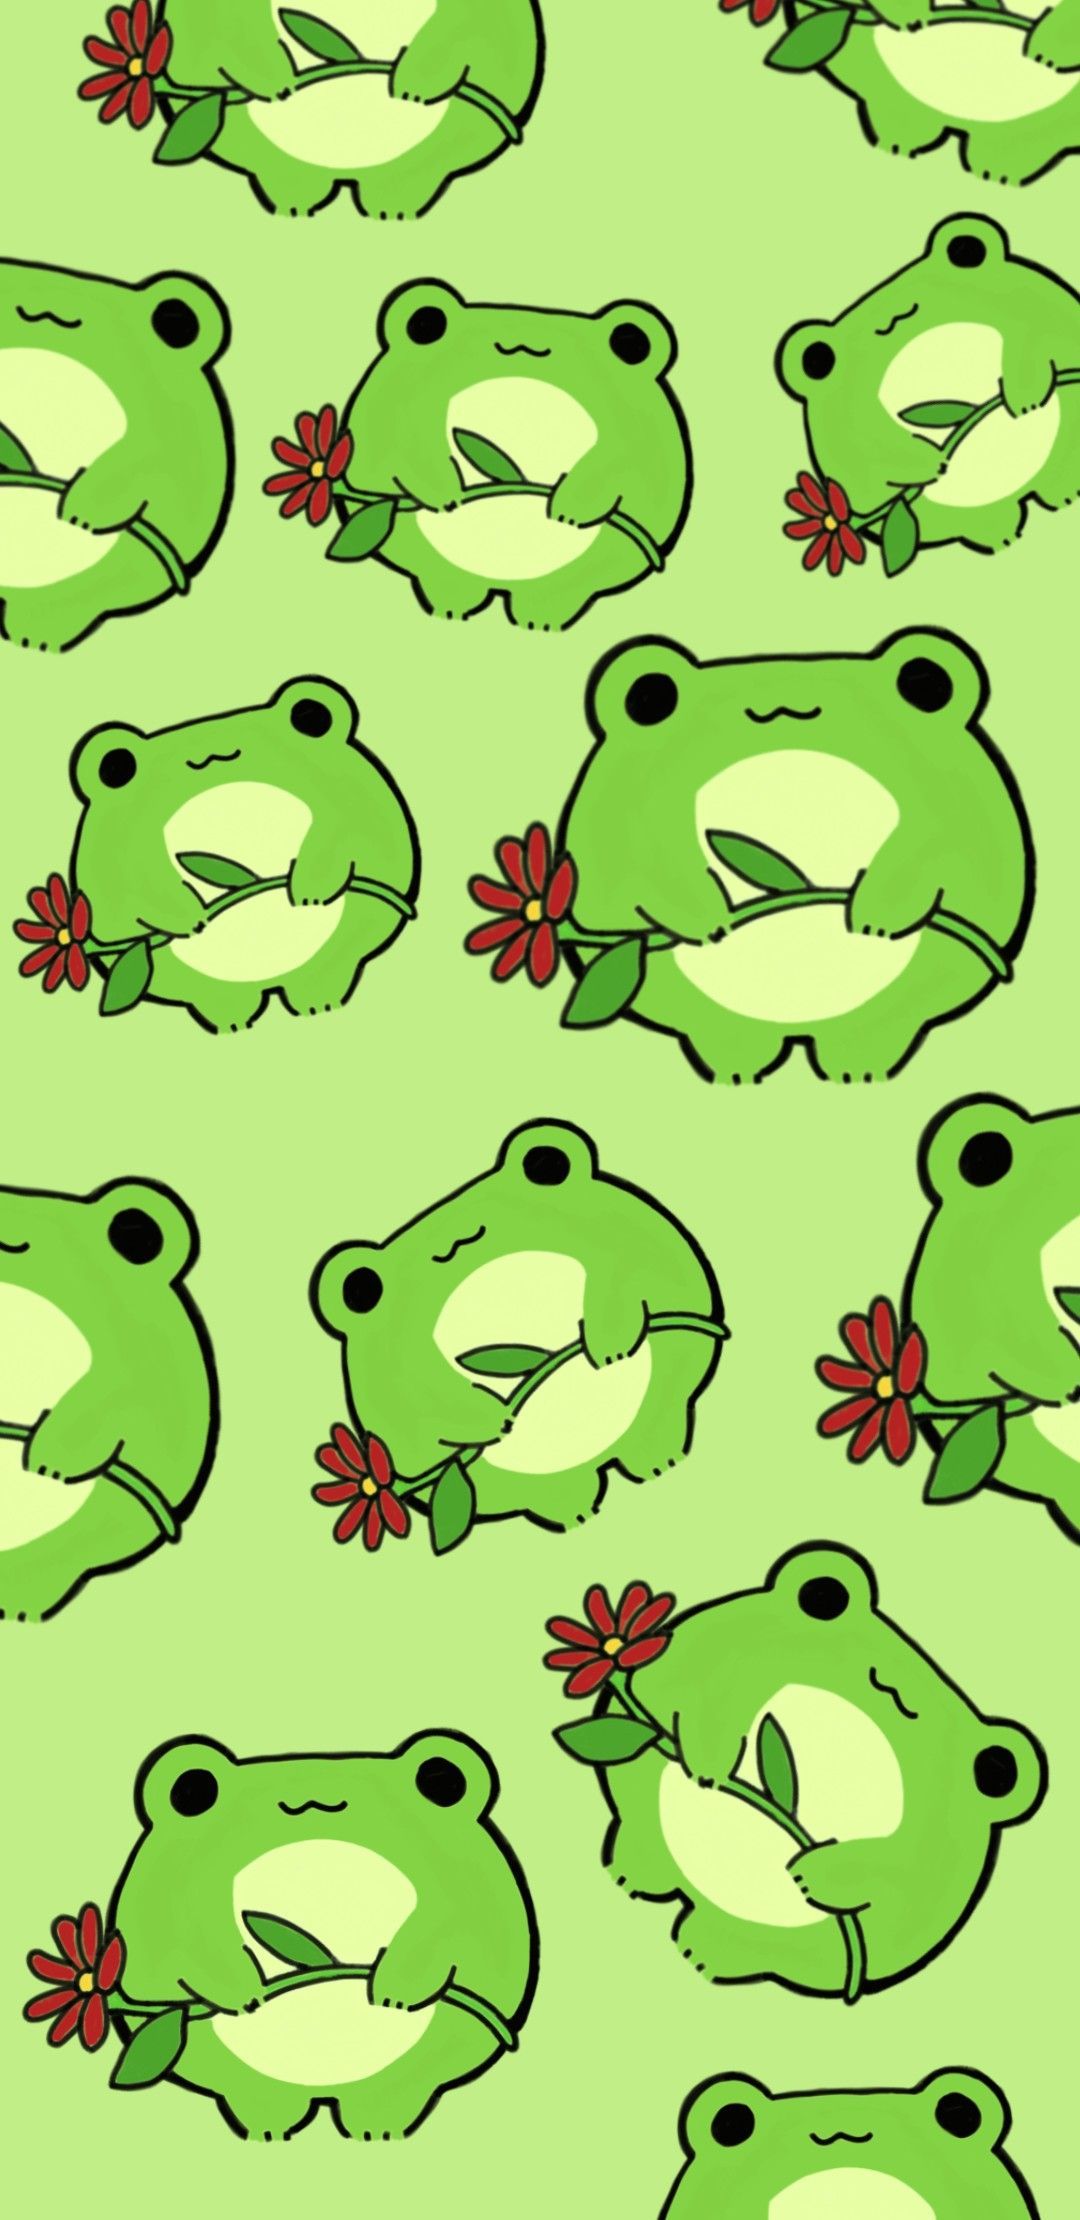 Tap to see more cute frog wallpaper for iPhone! - Frog